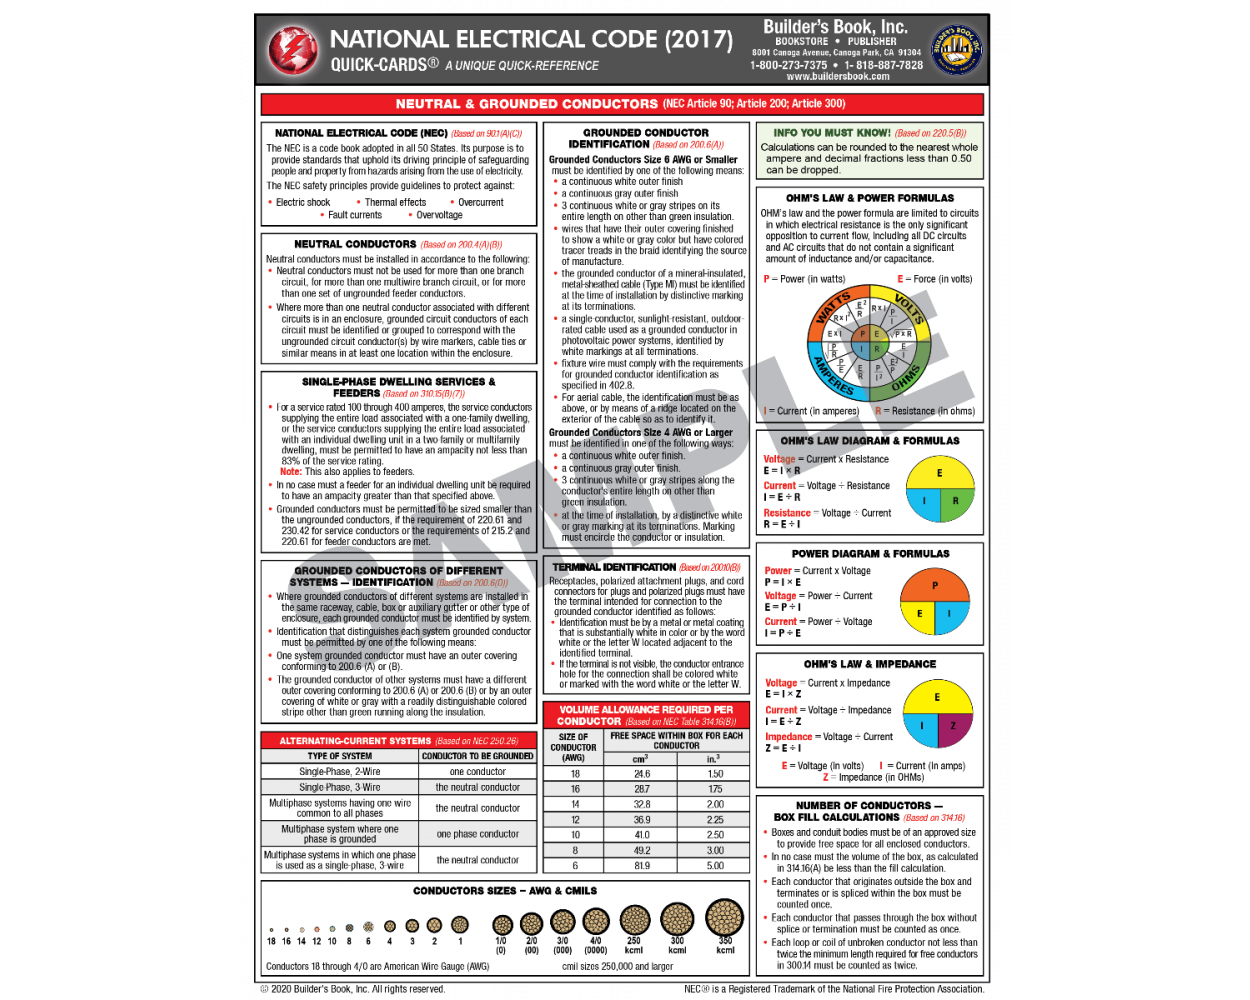 2017 National Electrical Code Nec Quick Card Builder S Book Inc Bookstore